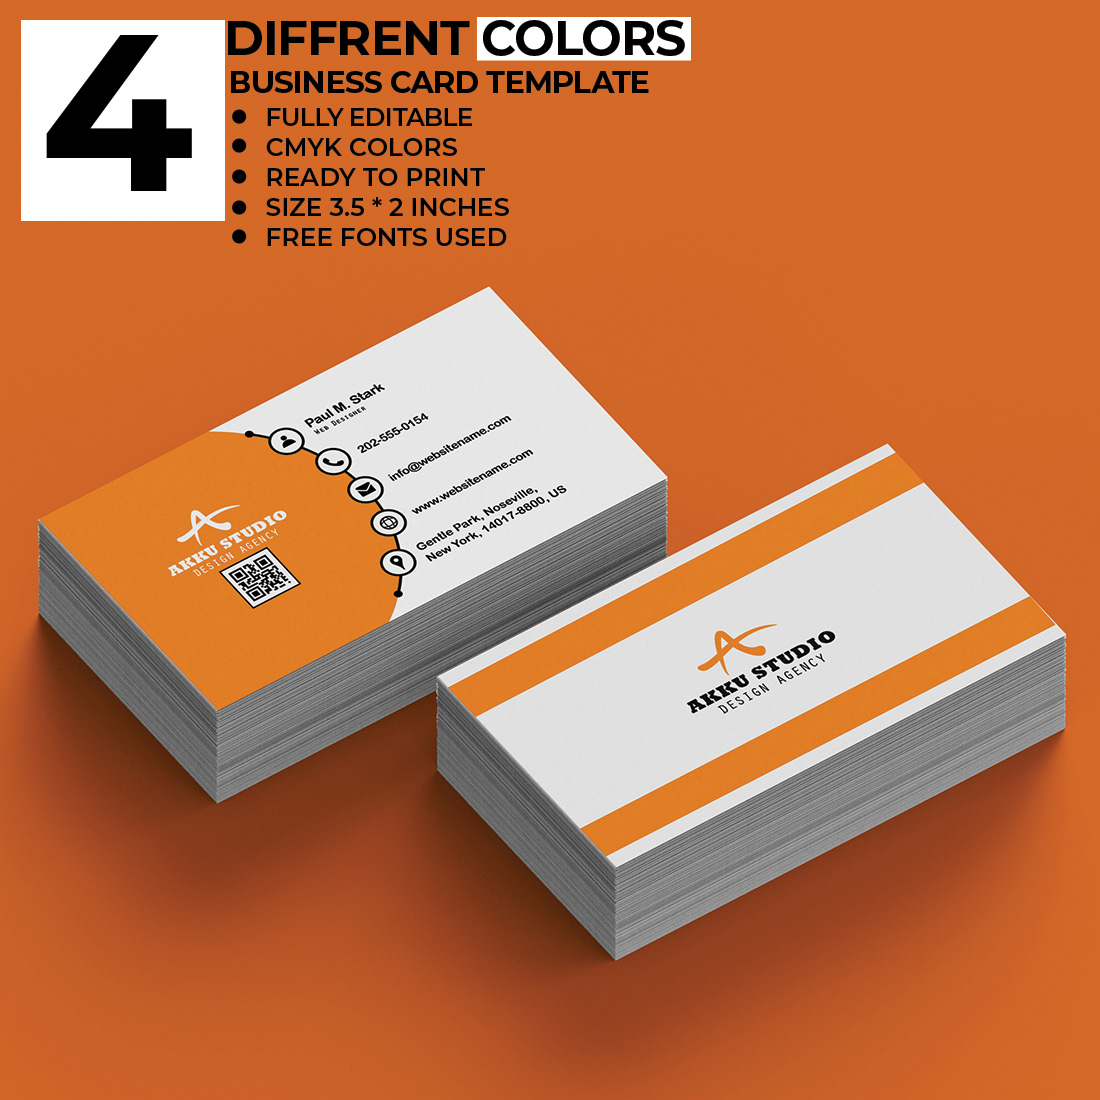 White and orange business card.